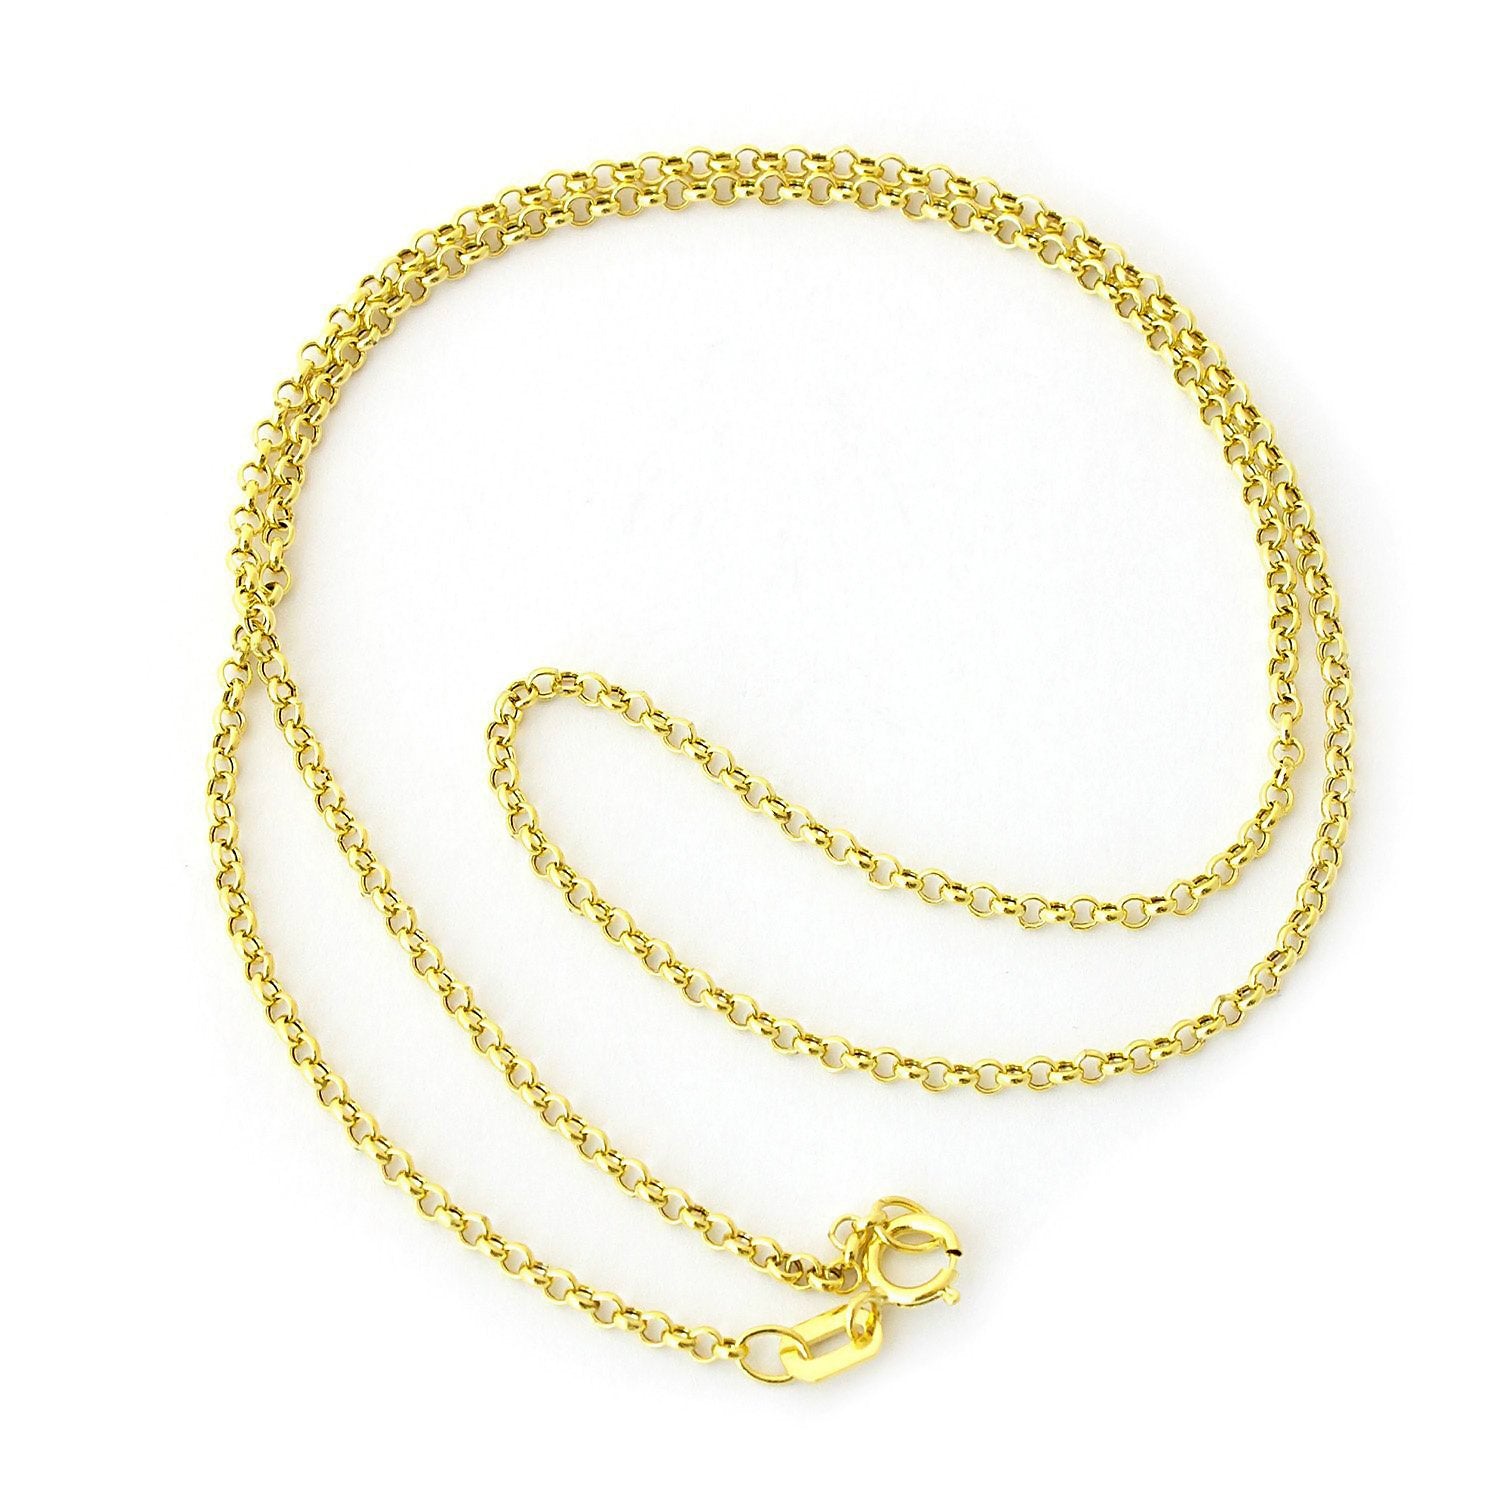 10K Yellow Gold 2mm Rolo Chain